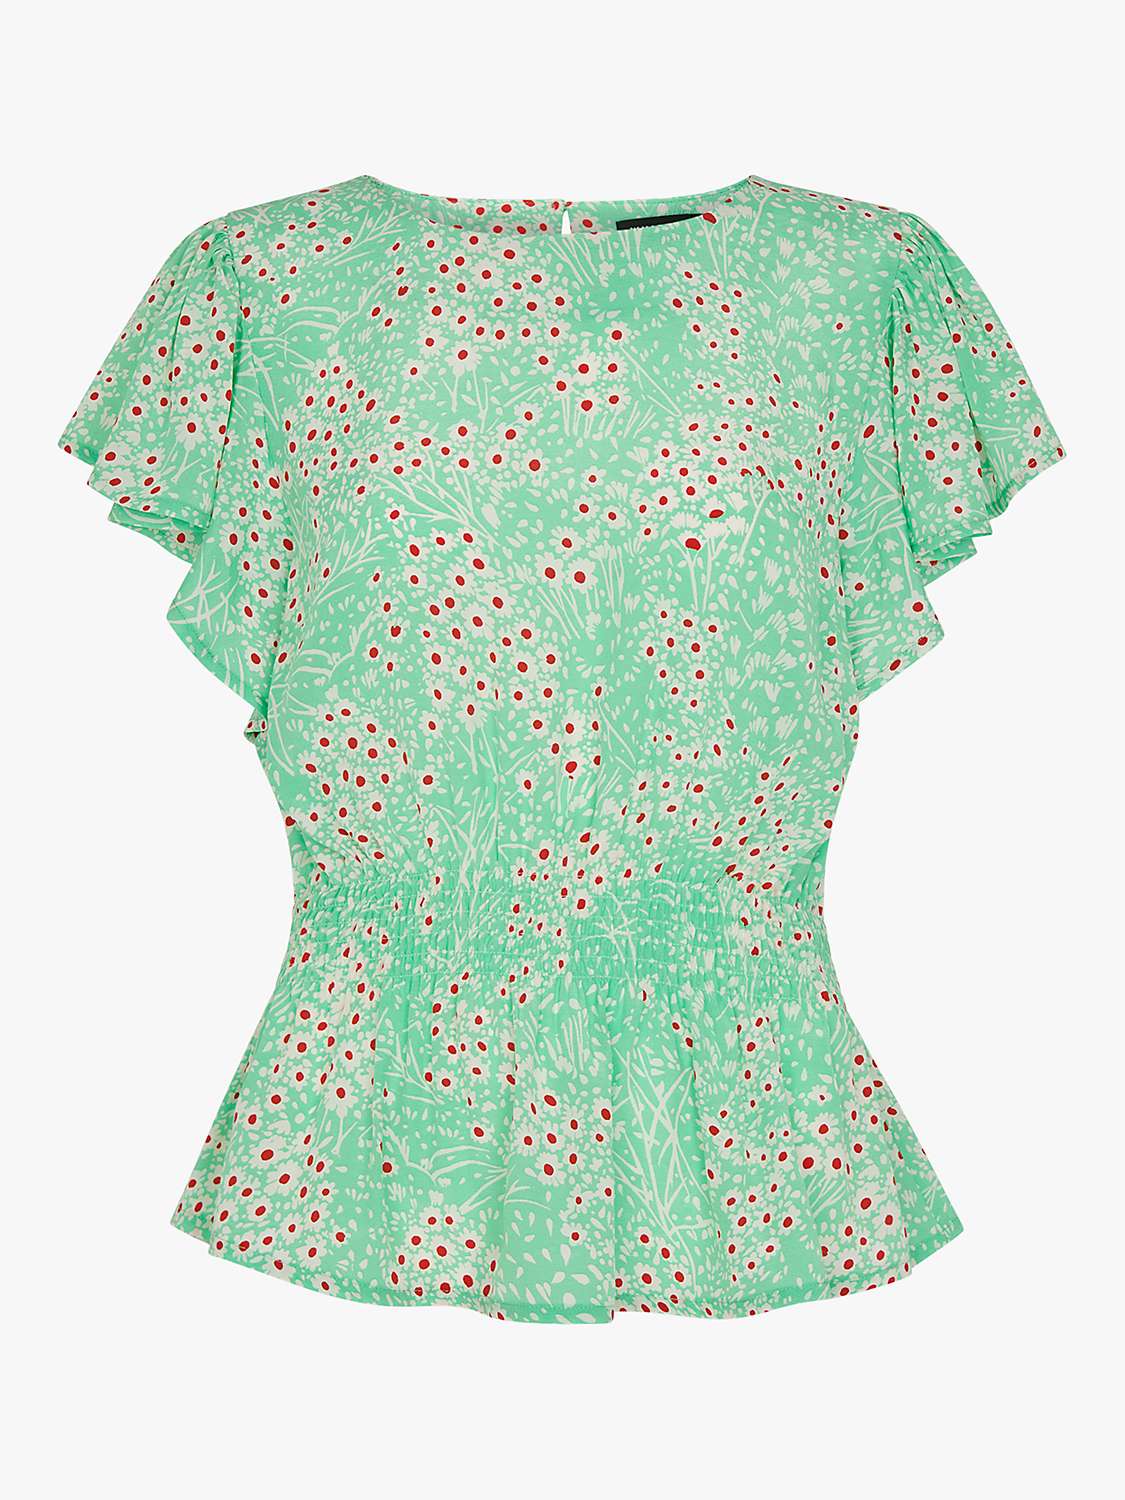 Buy Whistles Daisy Meadow Frill Sleeve Top, Green/Multi Online at johnlewis.com